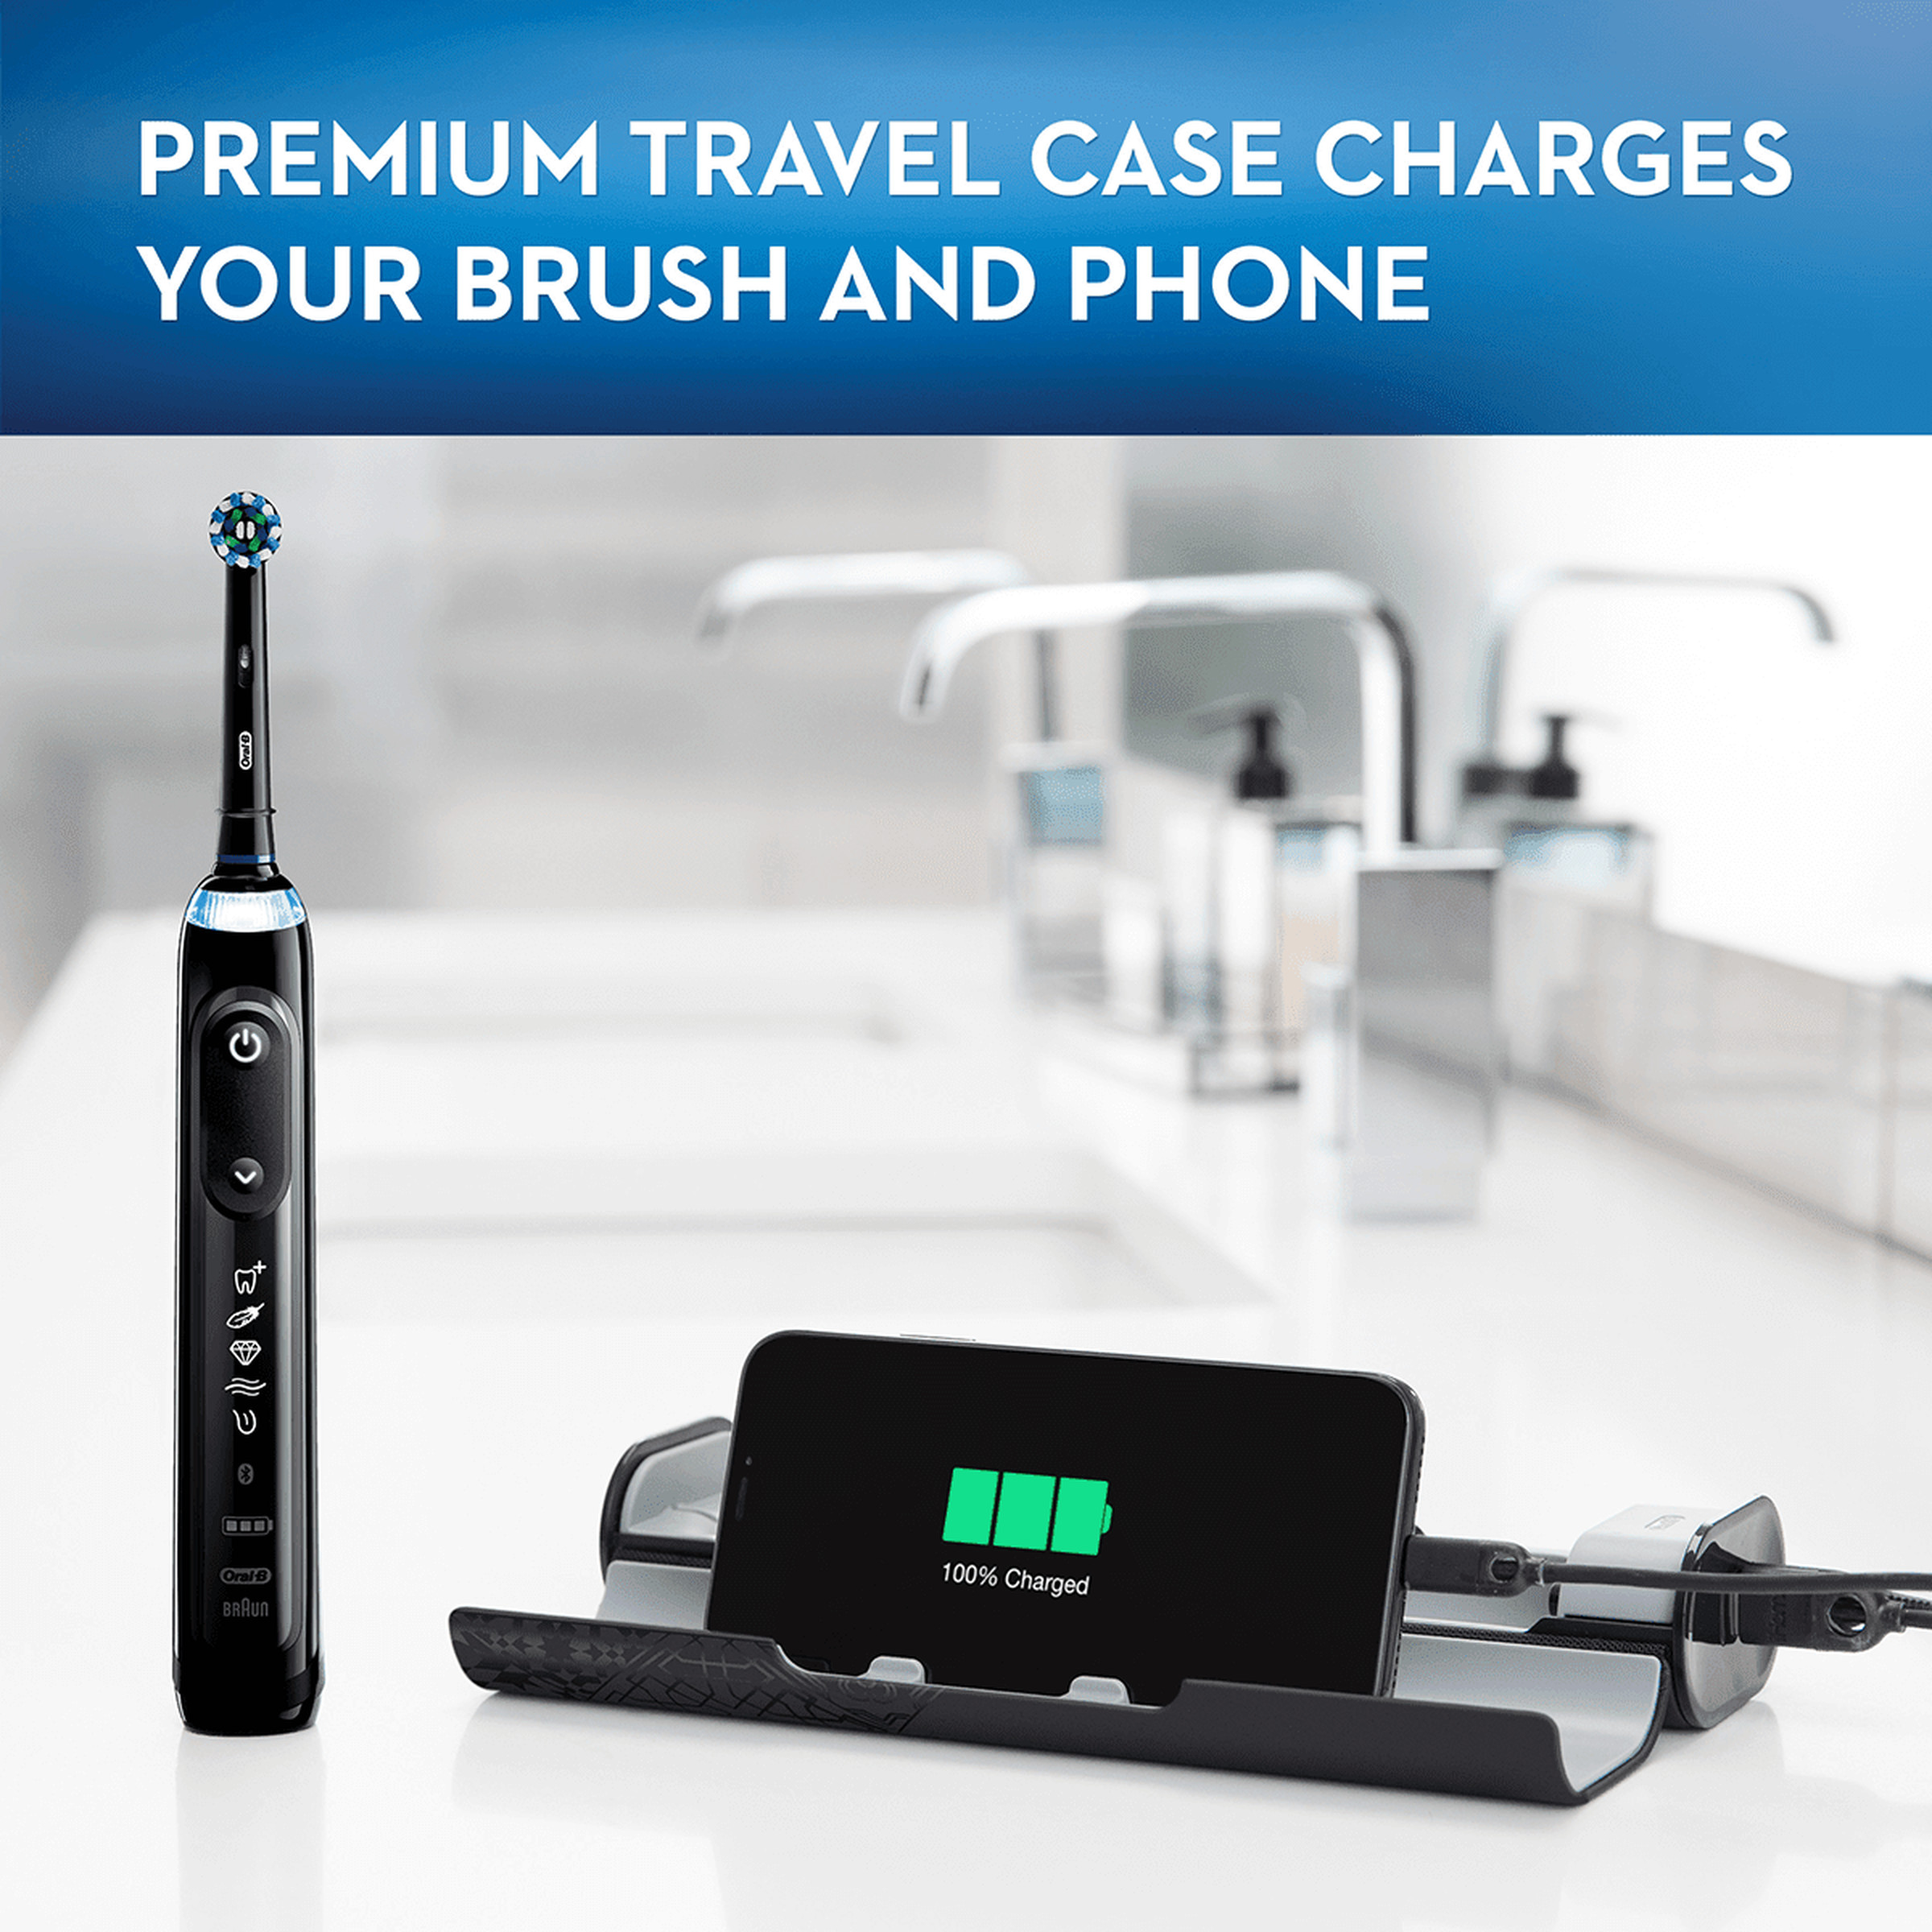 At least you get a phone charger with your $220 toothbrush.